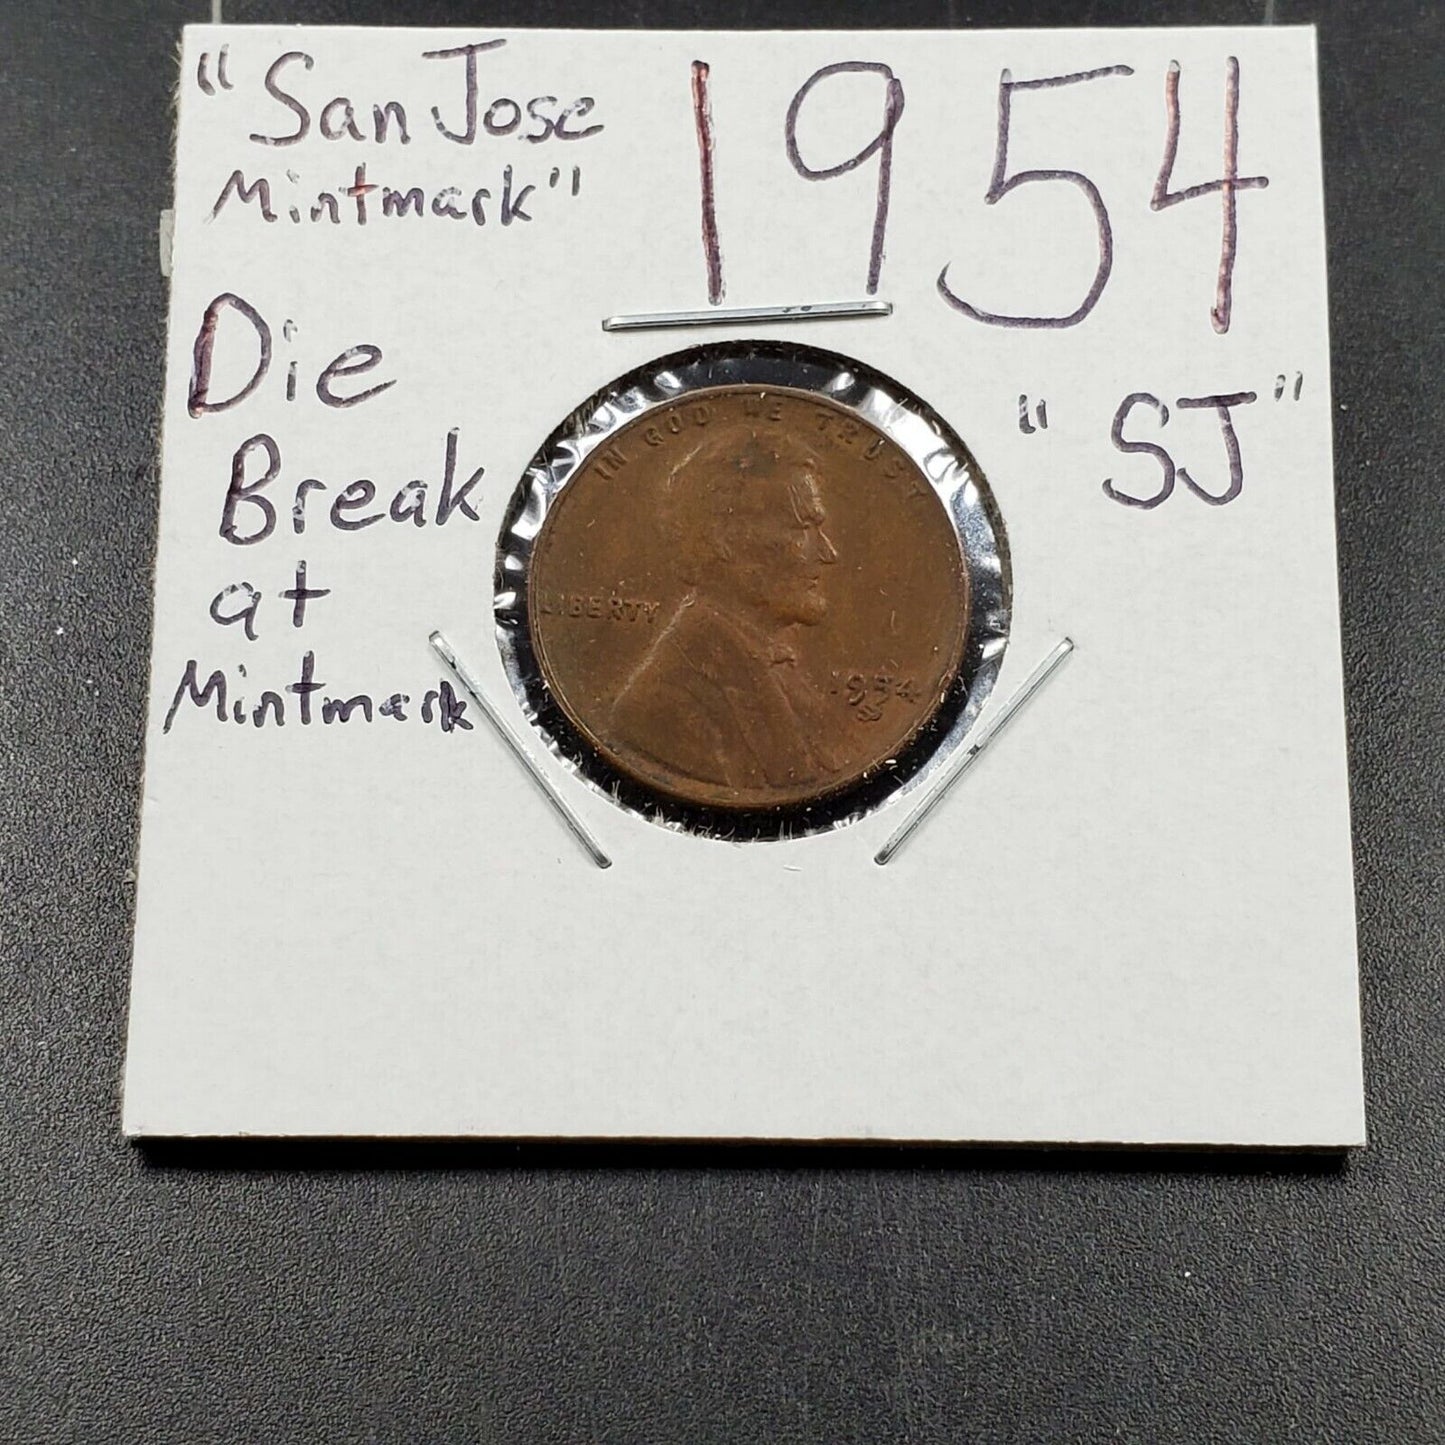 1954 S Lincoln Wheat Cent Variety Die Break At Mint Mark Variety "San Jose" MM